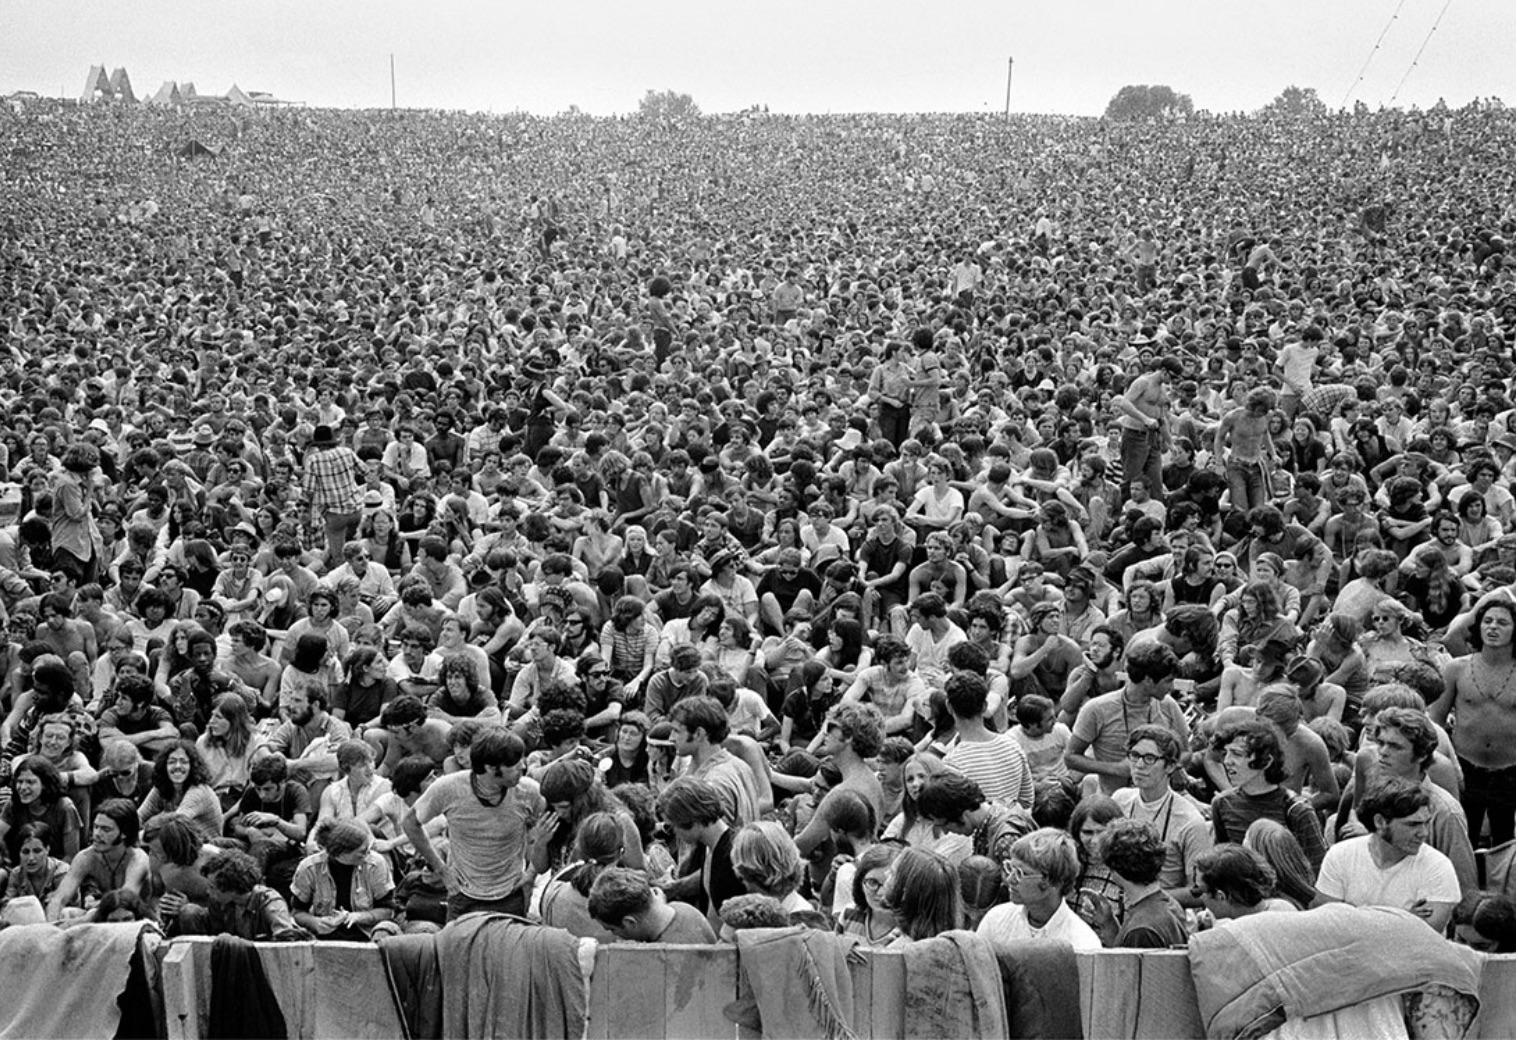 Baron Wolman Black and White Photograph - 300, 000 Strong, Woodstock